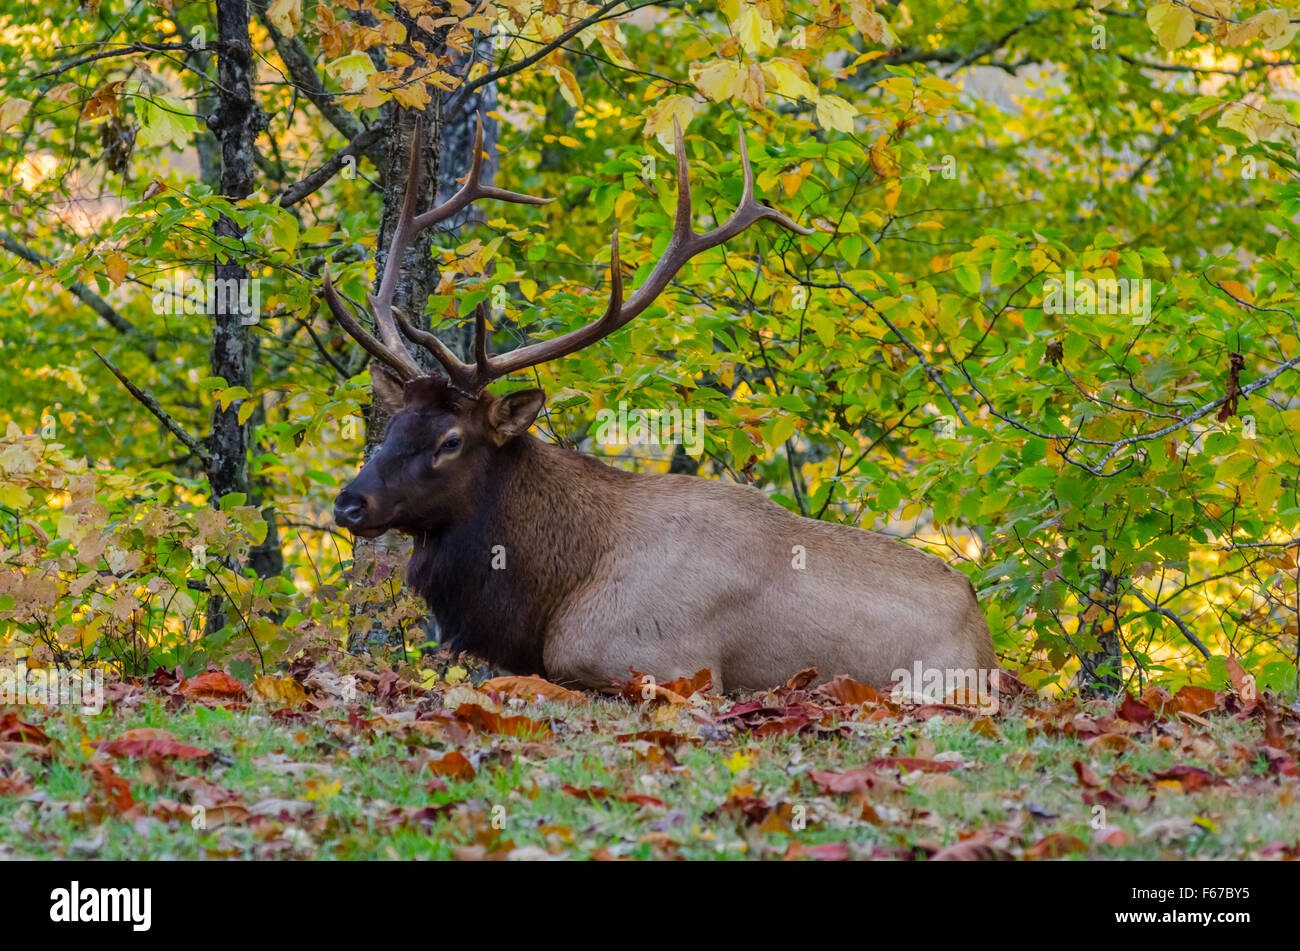 A large male elk rests in a field with fallen leaves near the Smoky Mountains Stock Photo